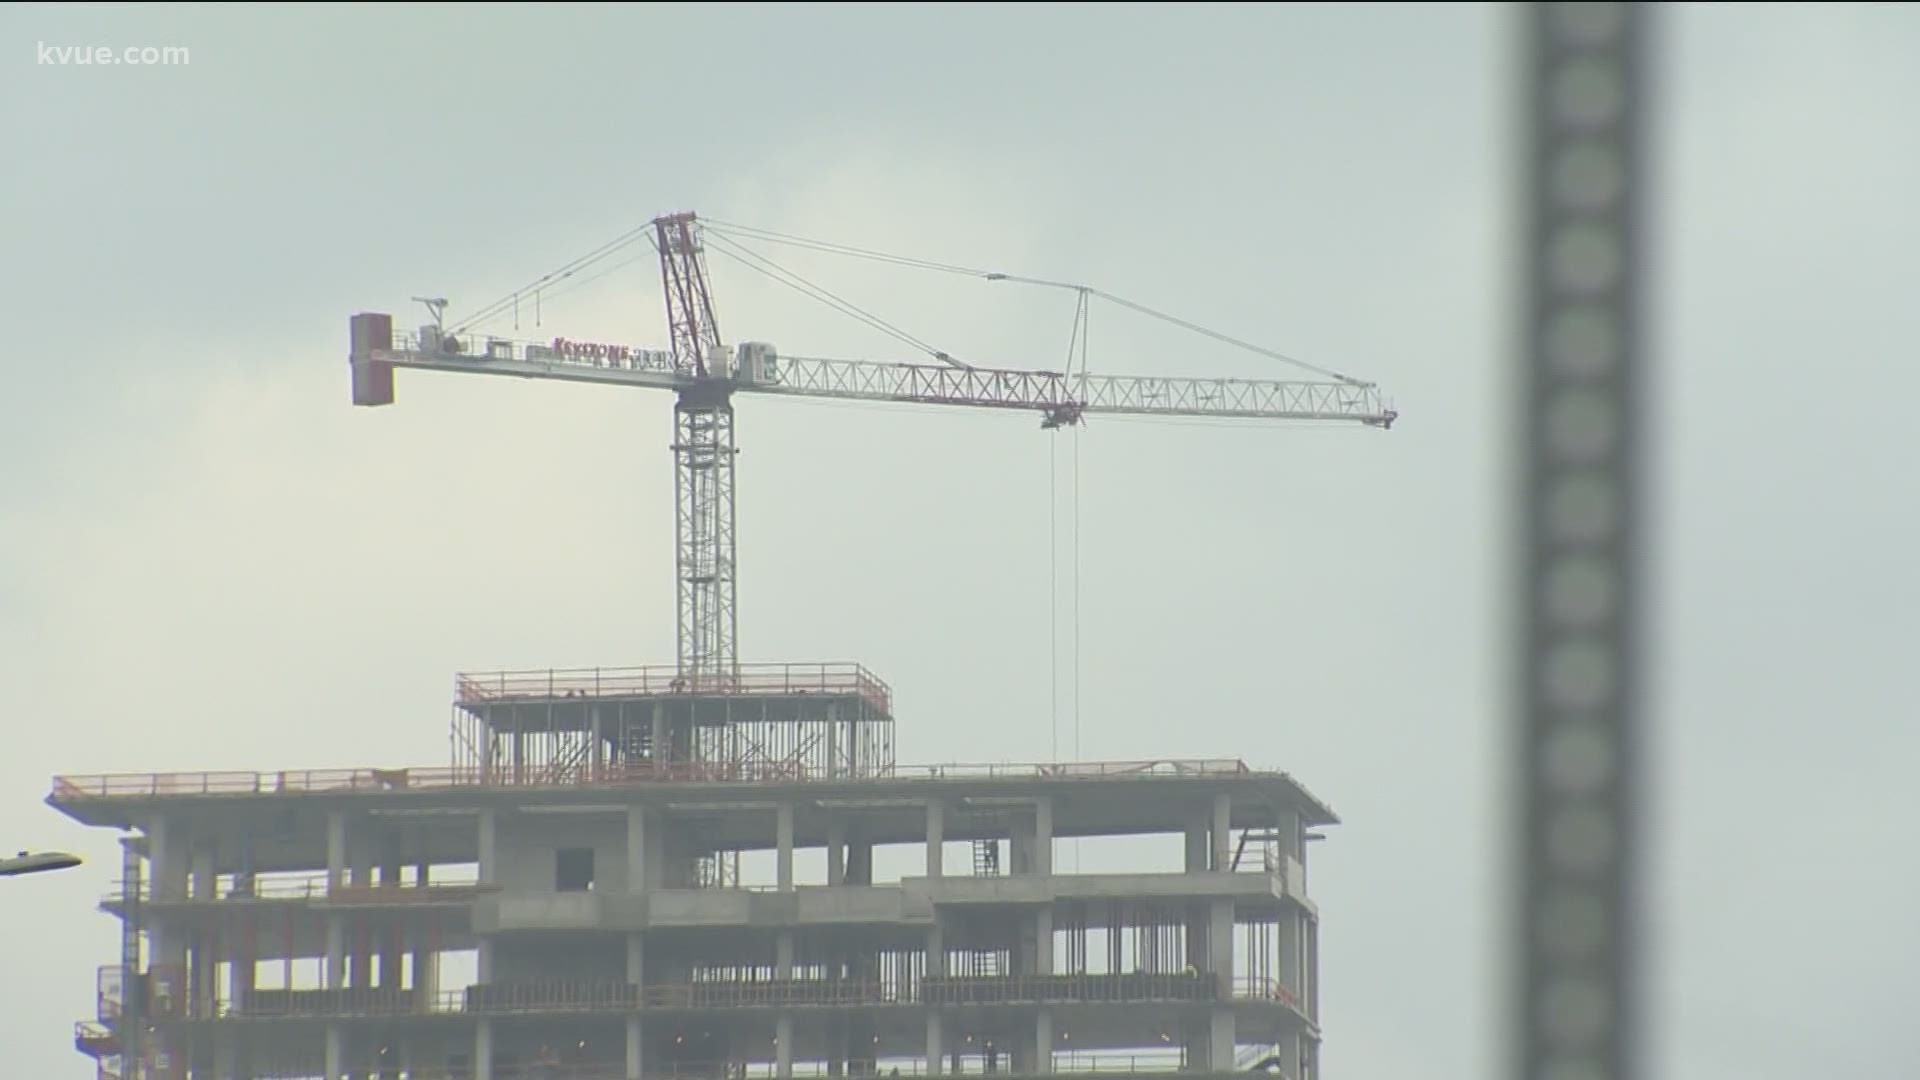 If you’re seeing a lot of cranes downtown, that’s because more than two dozen projects are still underway with only one canceled due to COVID-19.